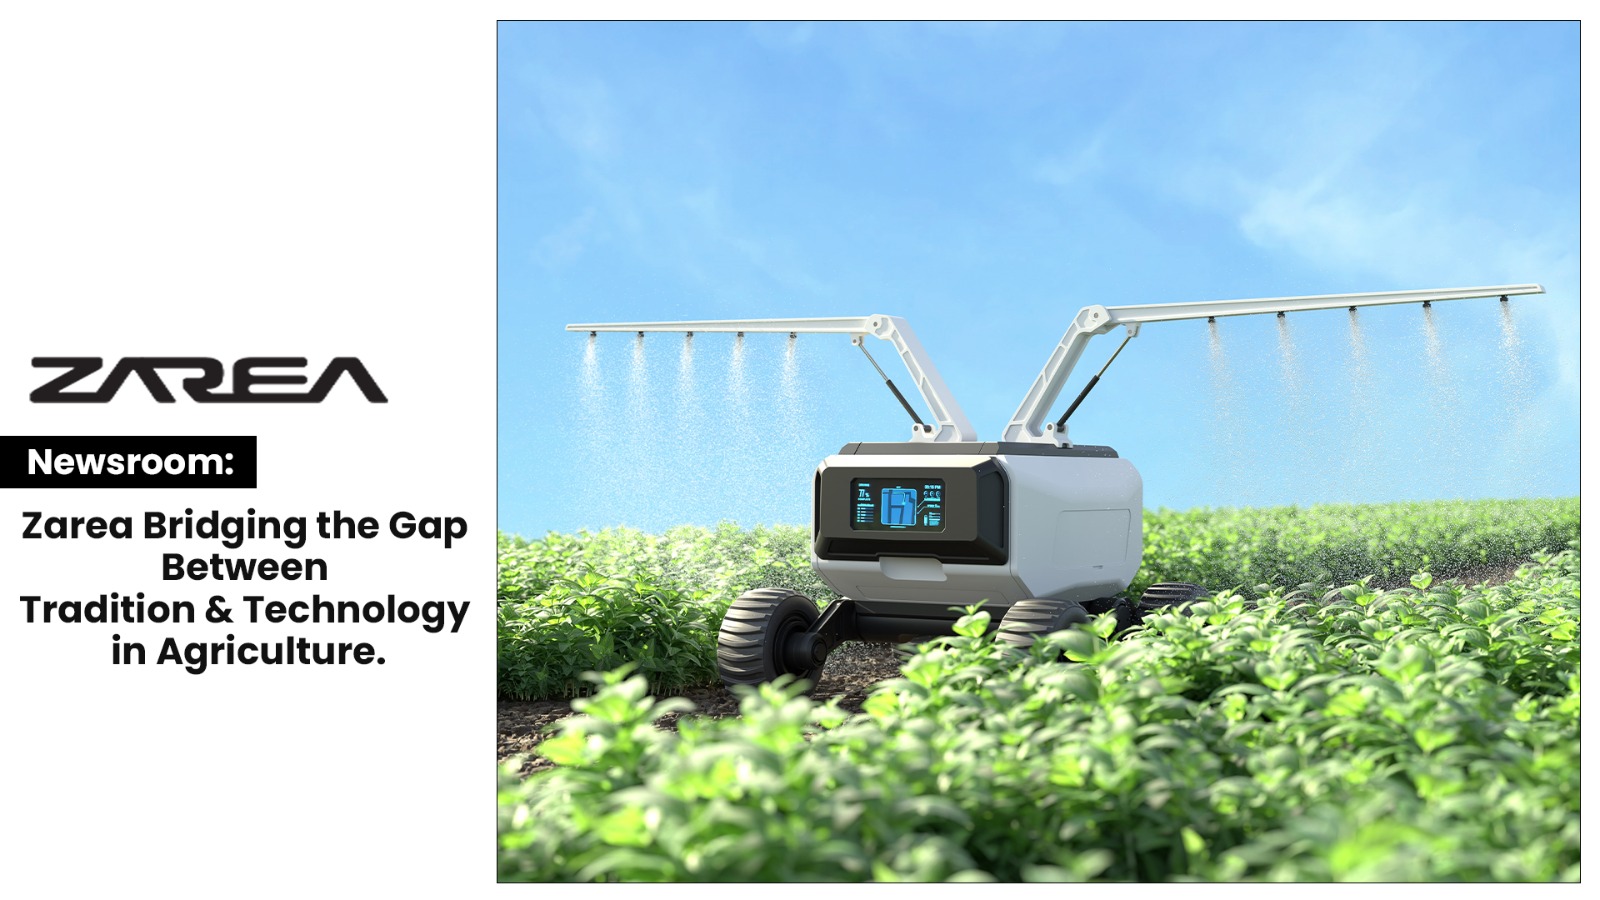 Zarea: Bridging the Gap Between Tradition and Technology in Agriculture